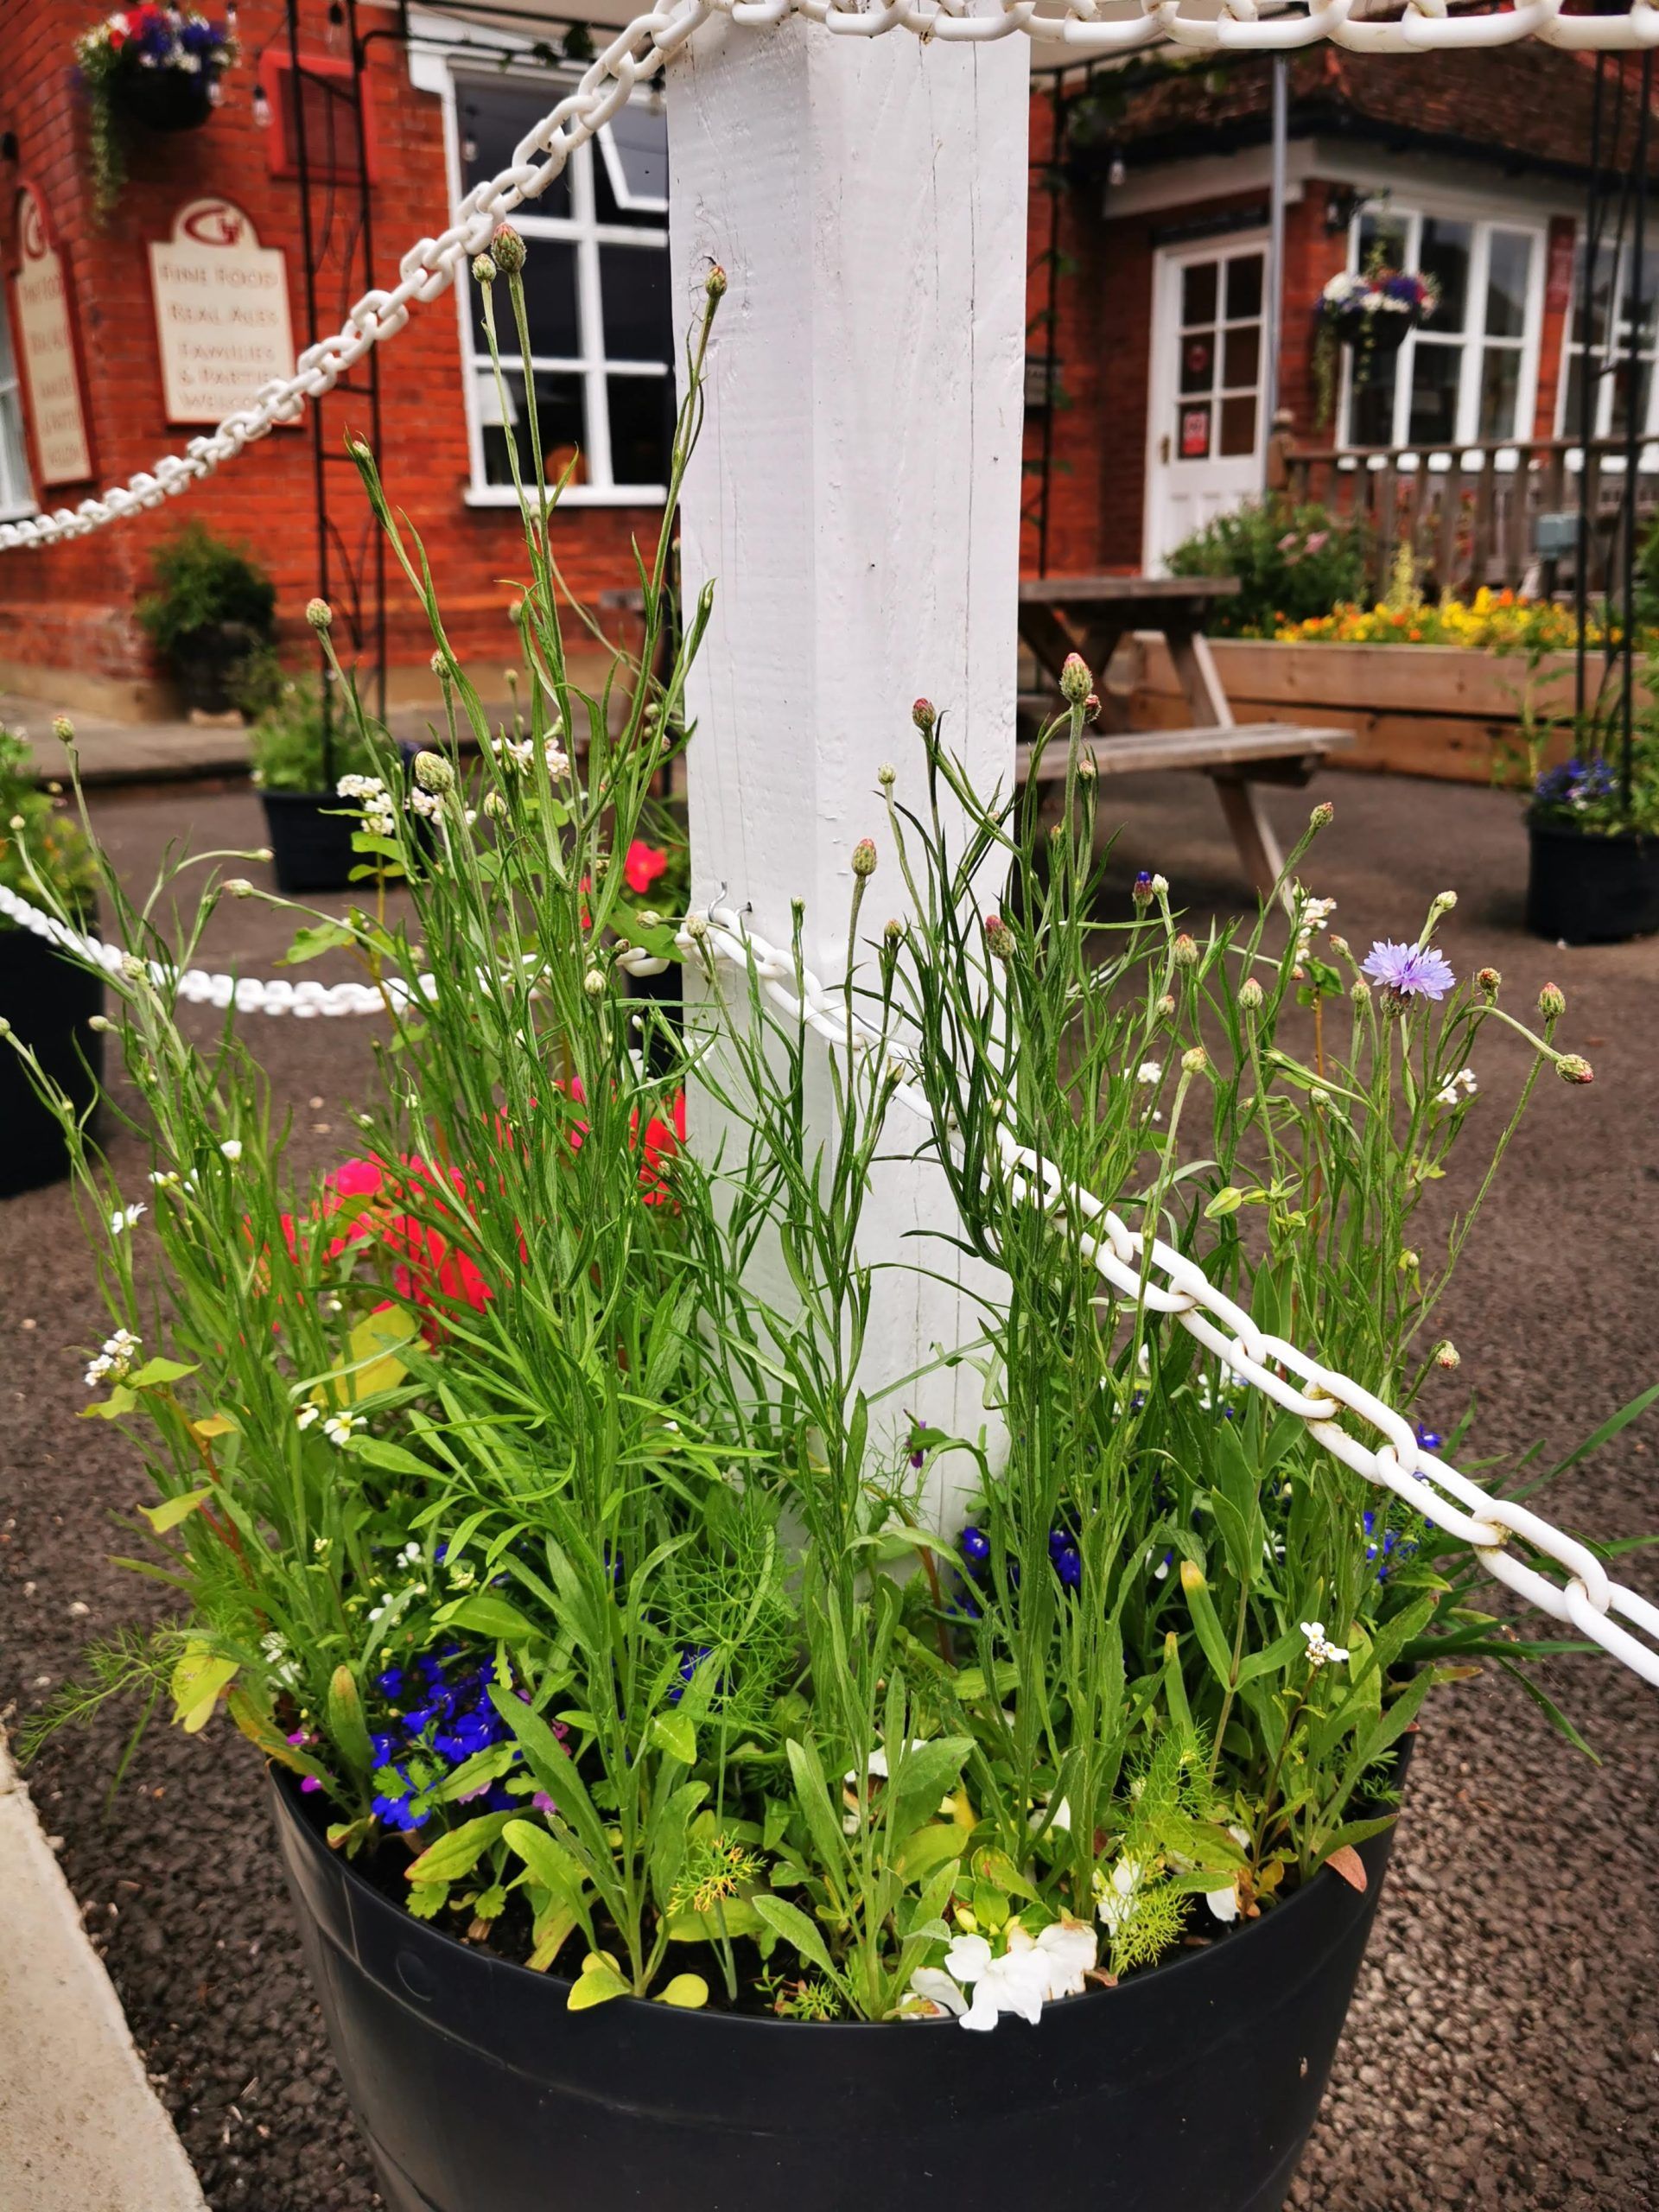 A planter outside a pub filled with bright flowers